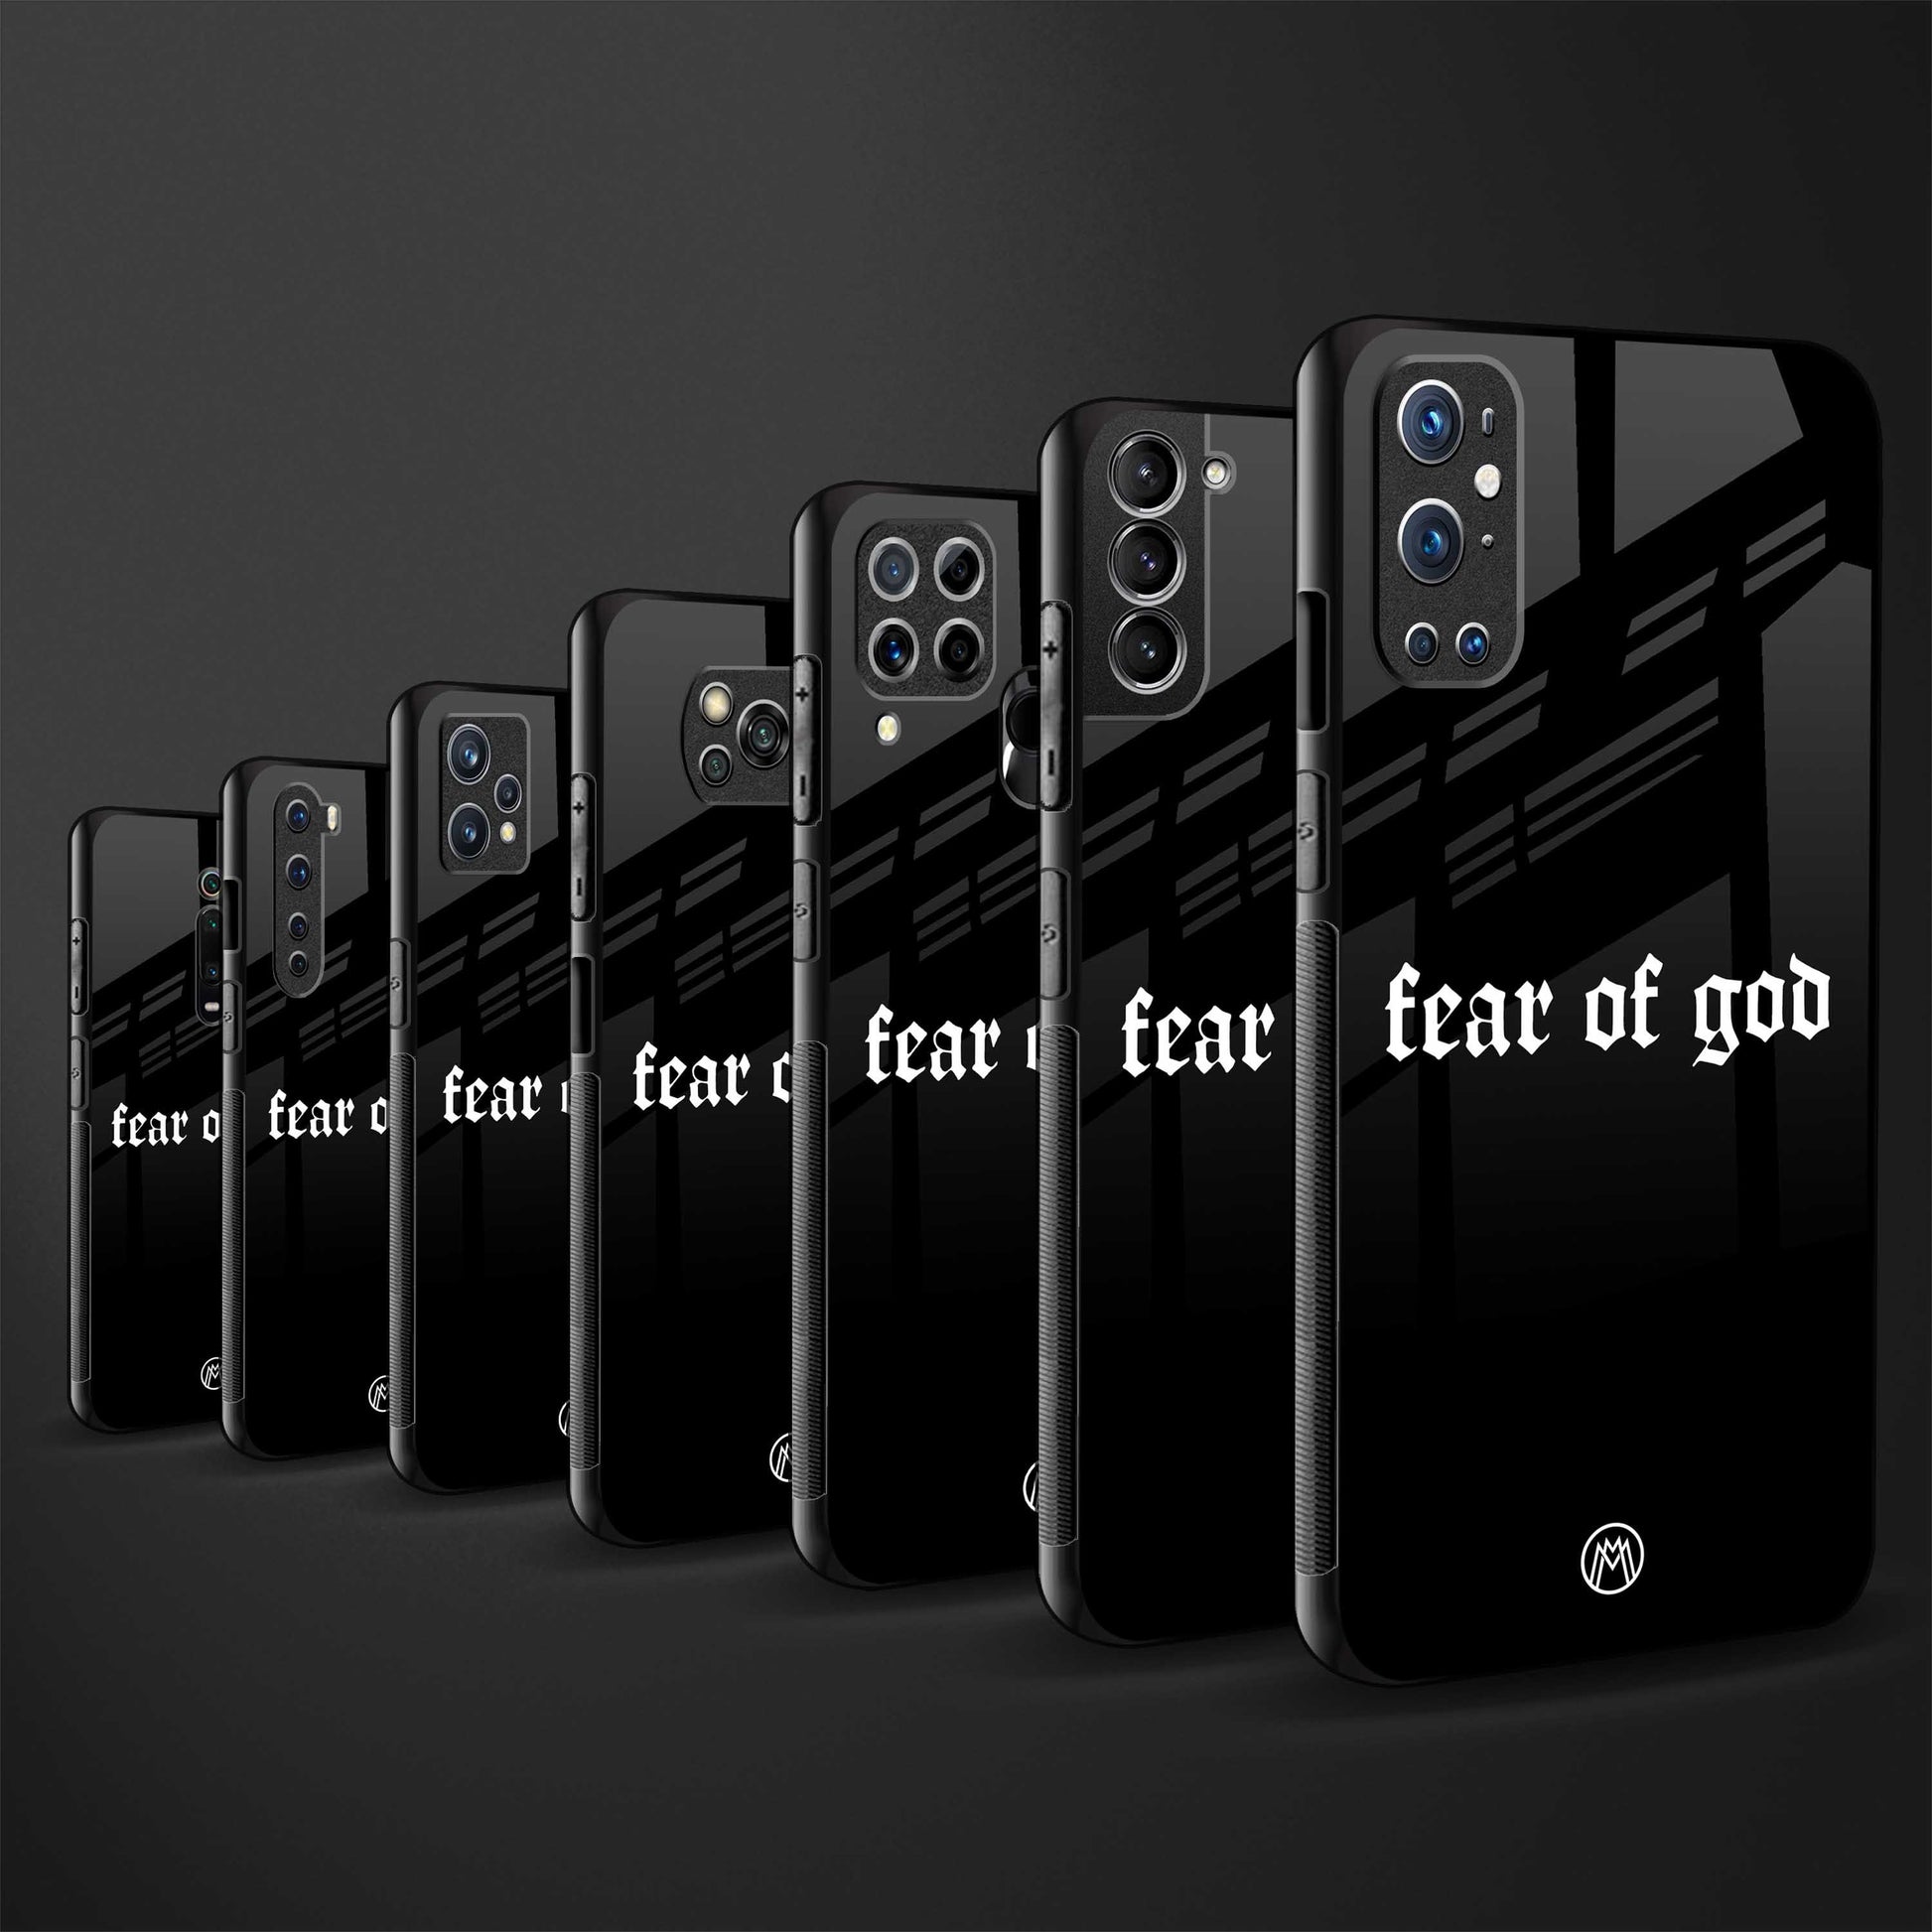 fear of god phone cover for oppo f11